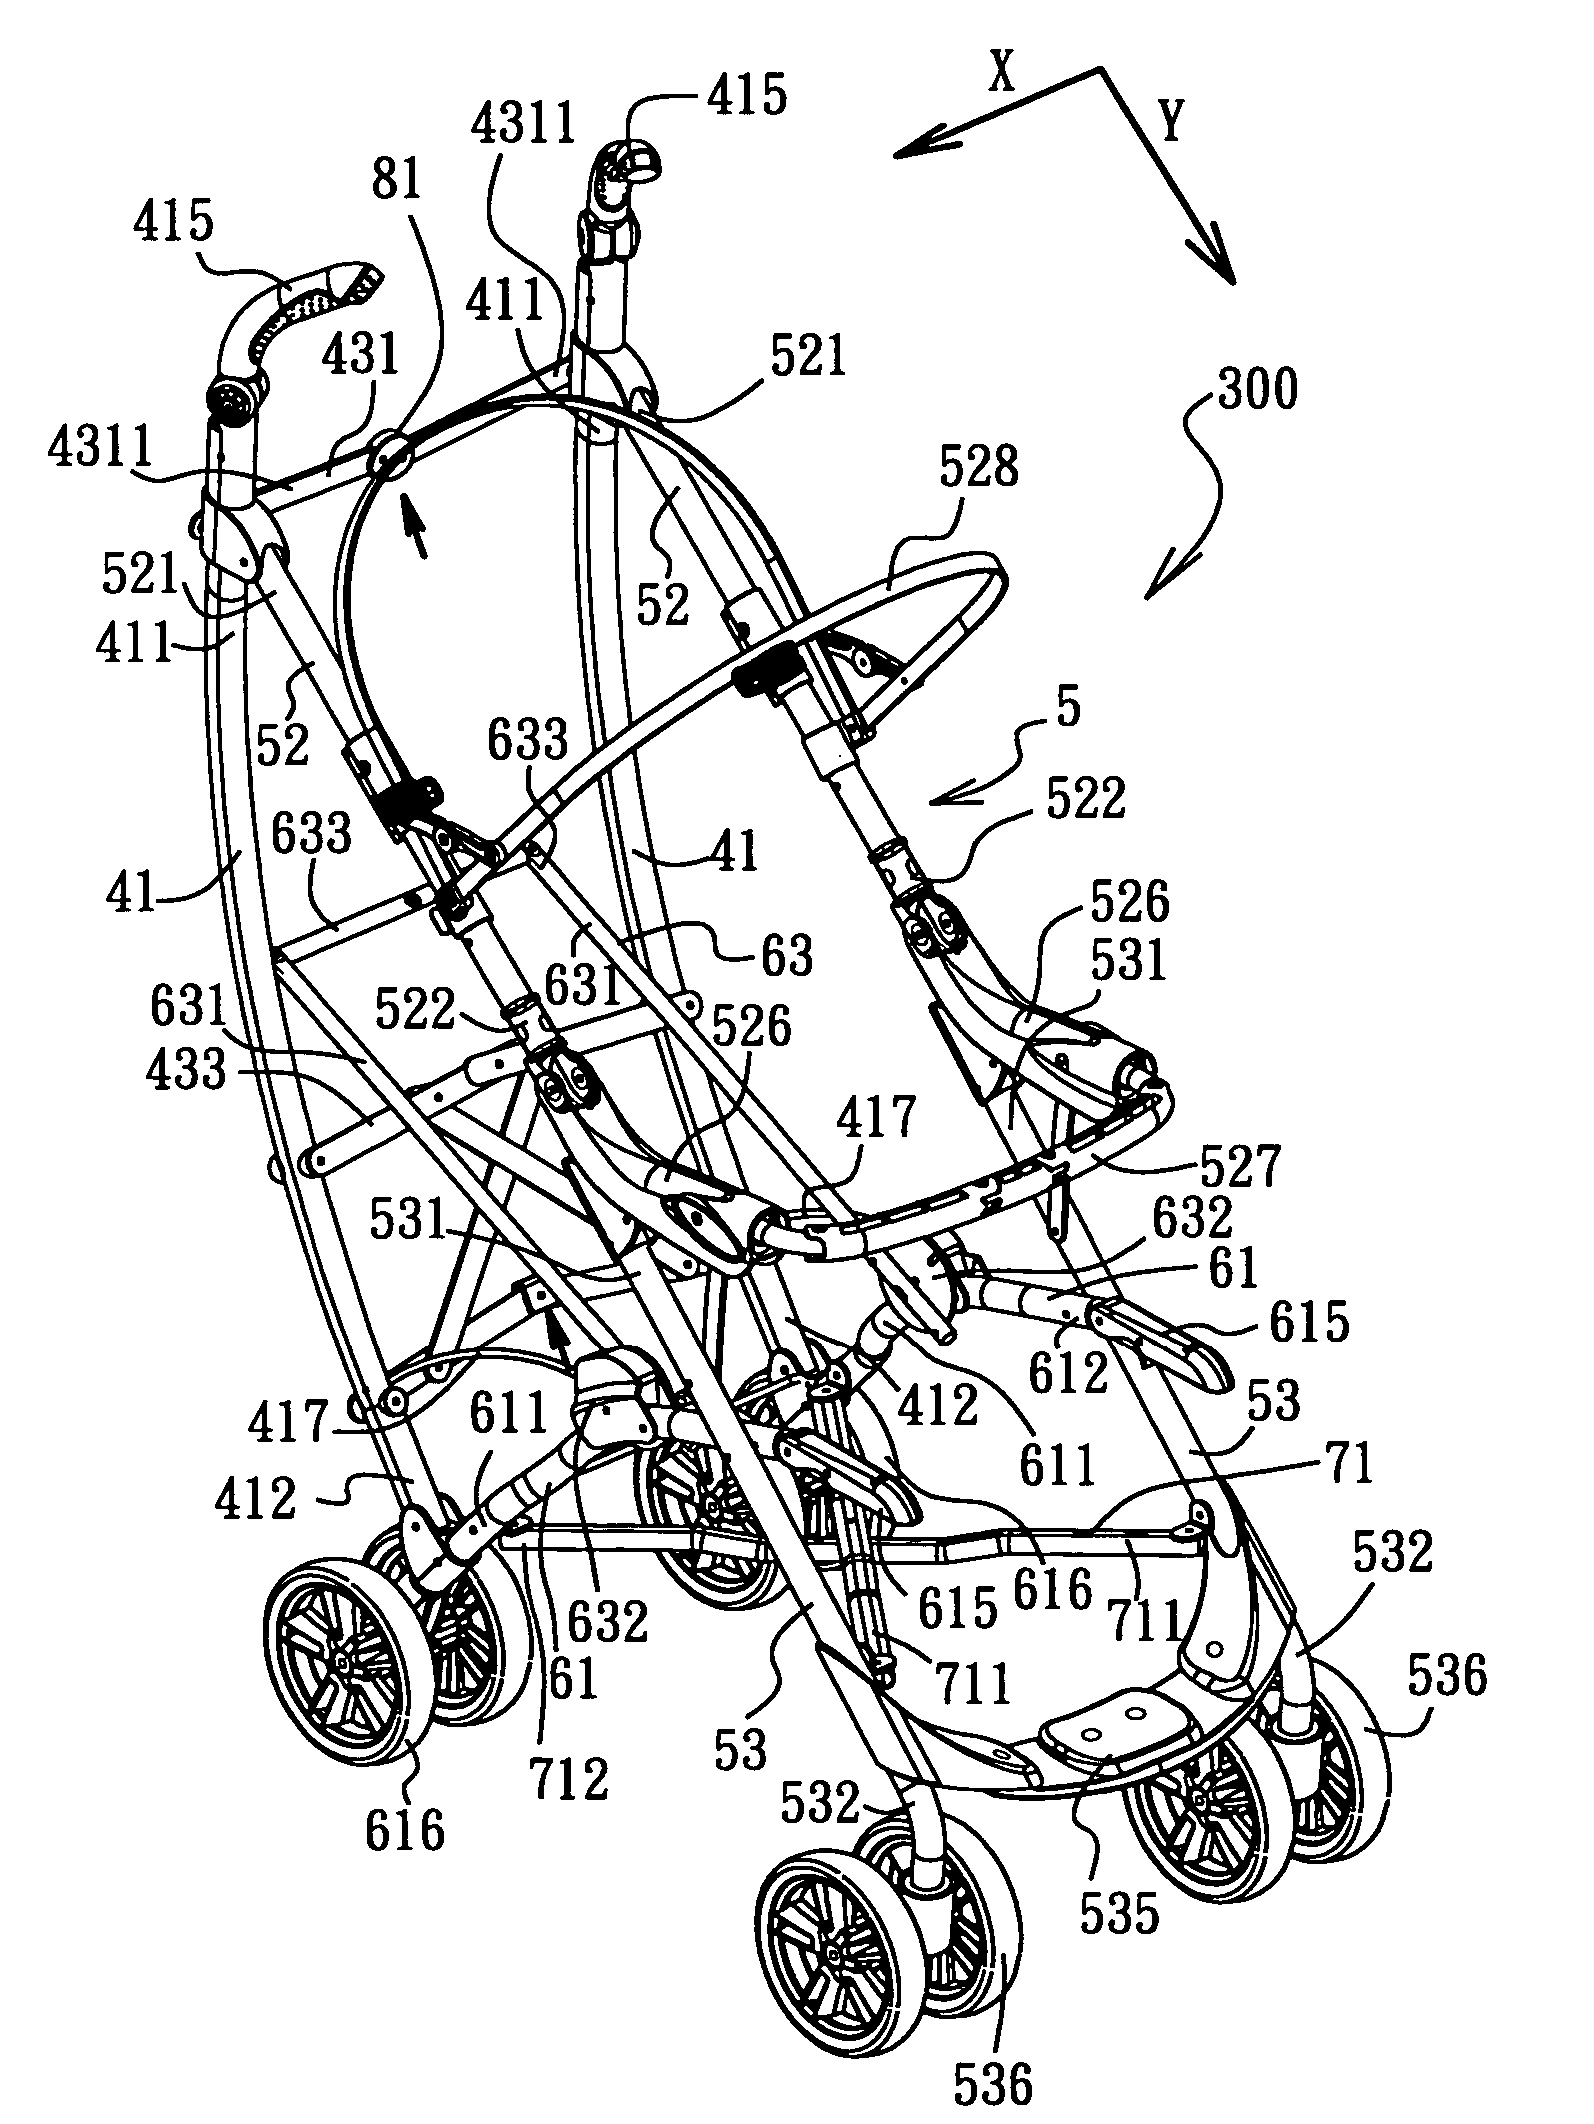 Stroller frame foldable in two directions